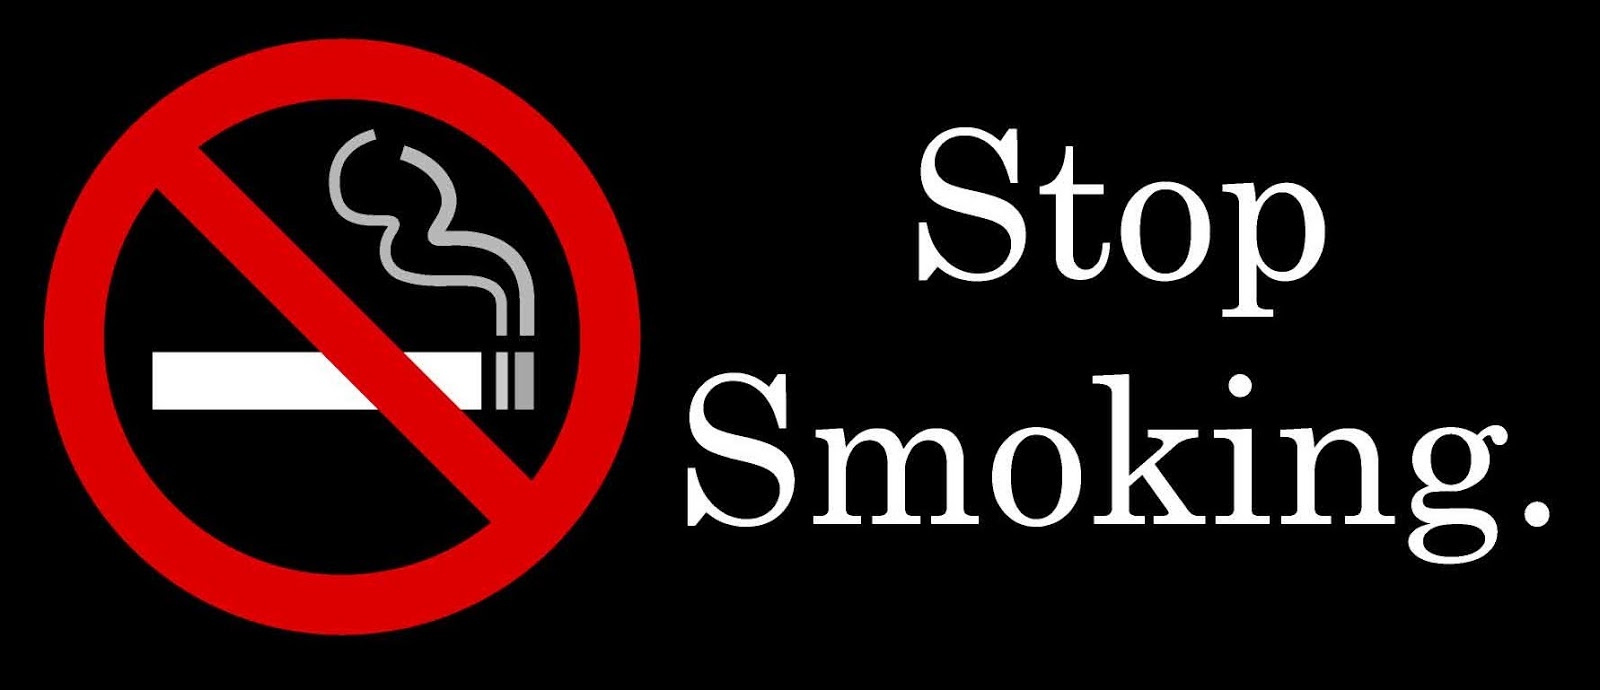 How to Prevent Kids from Smoking – 3 Steps